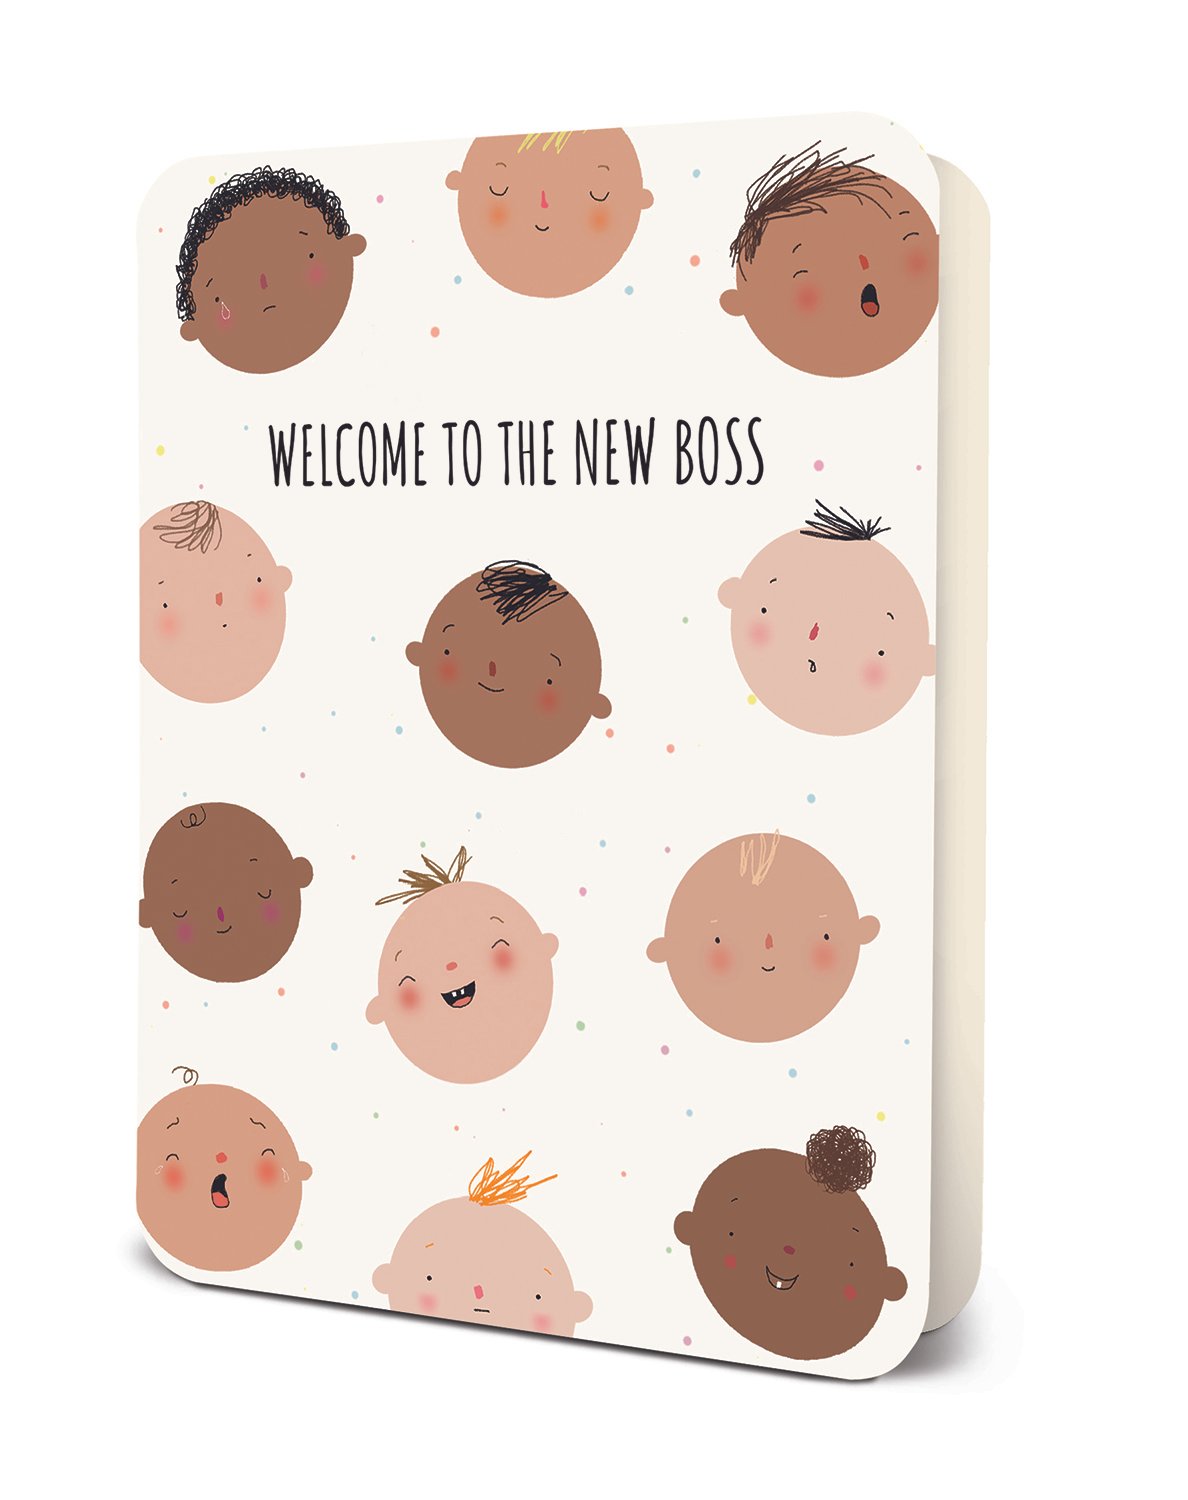 Welcome to the New Boss - Greeting Card Greeting Card Orange Circle Studio